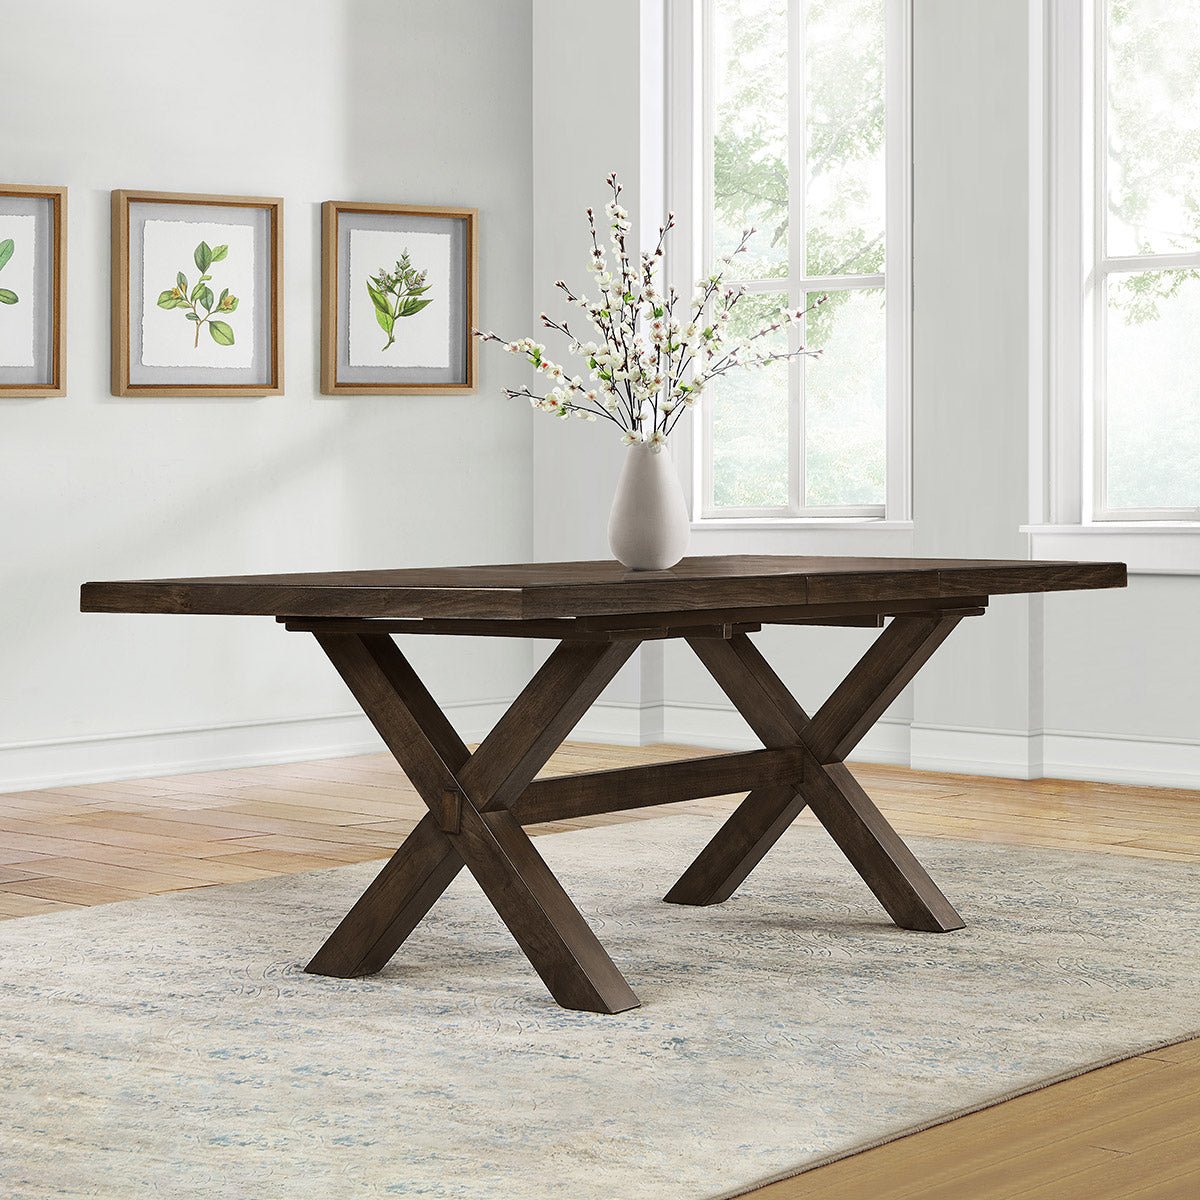 Blakely 7-Piece Dining Set - Alpine Outlets